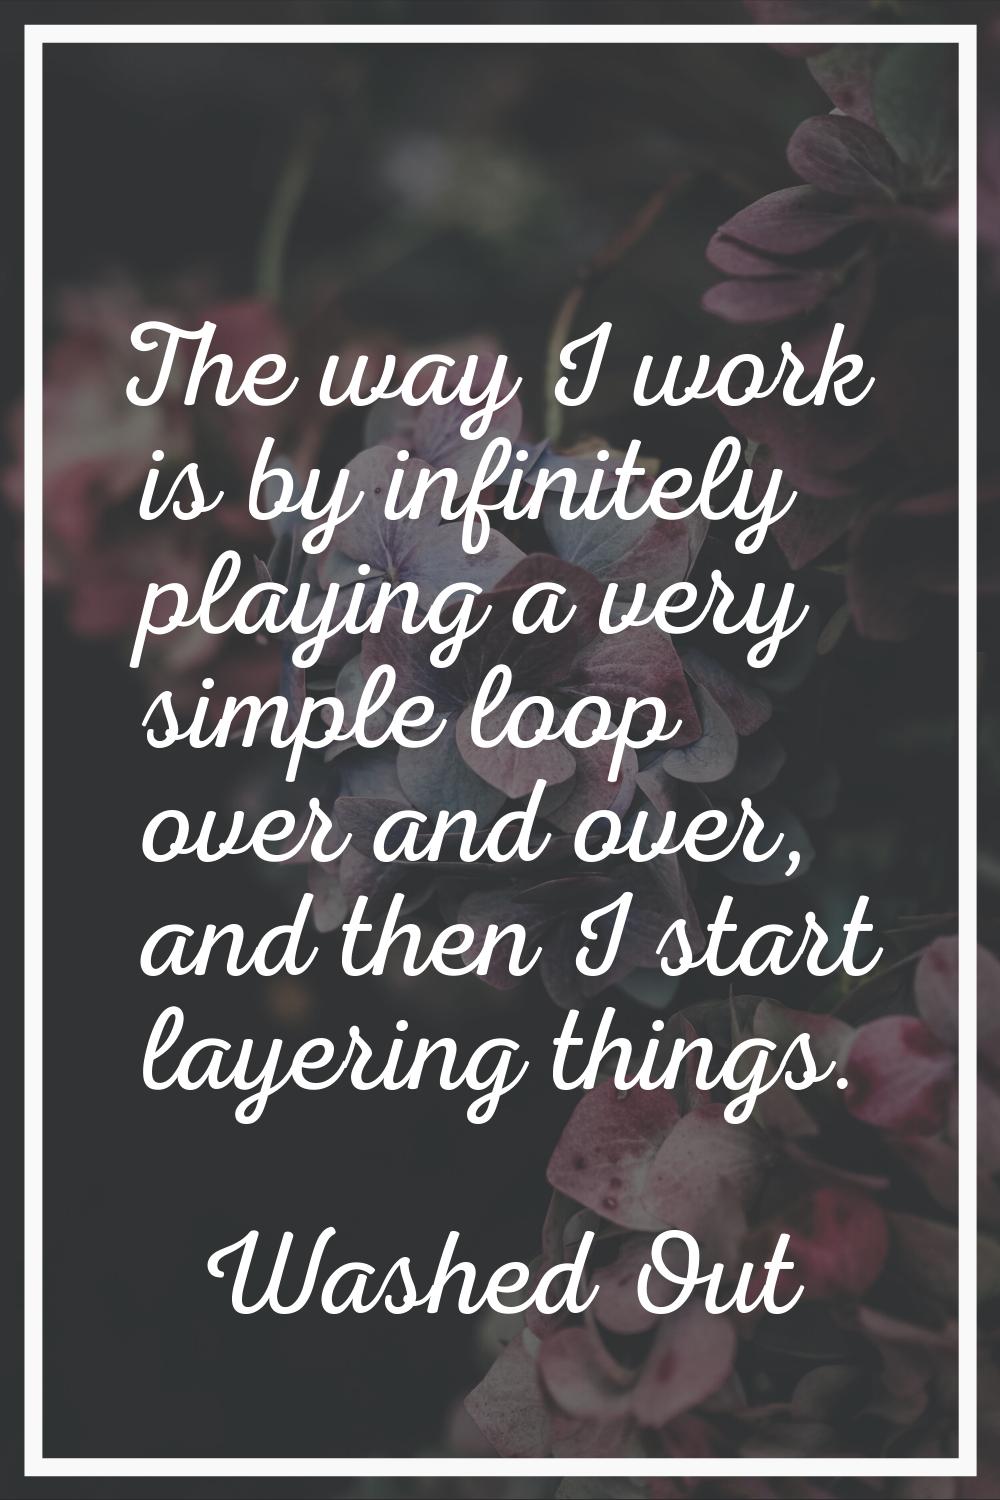 The way I work is by infinitely playing a very simple loop over and over, and then I start layering